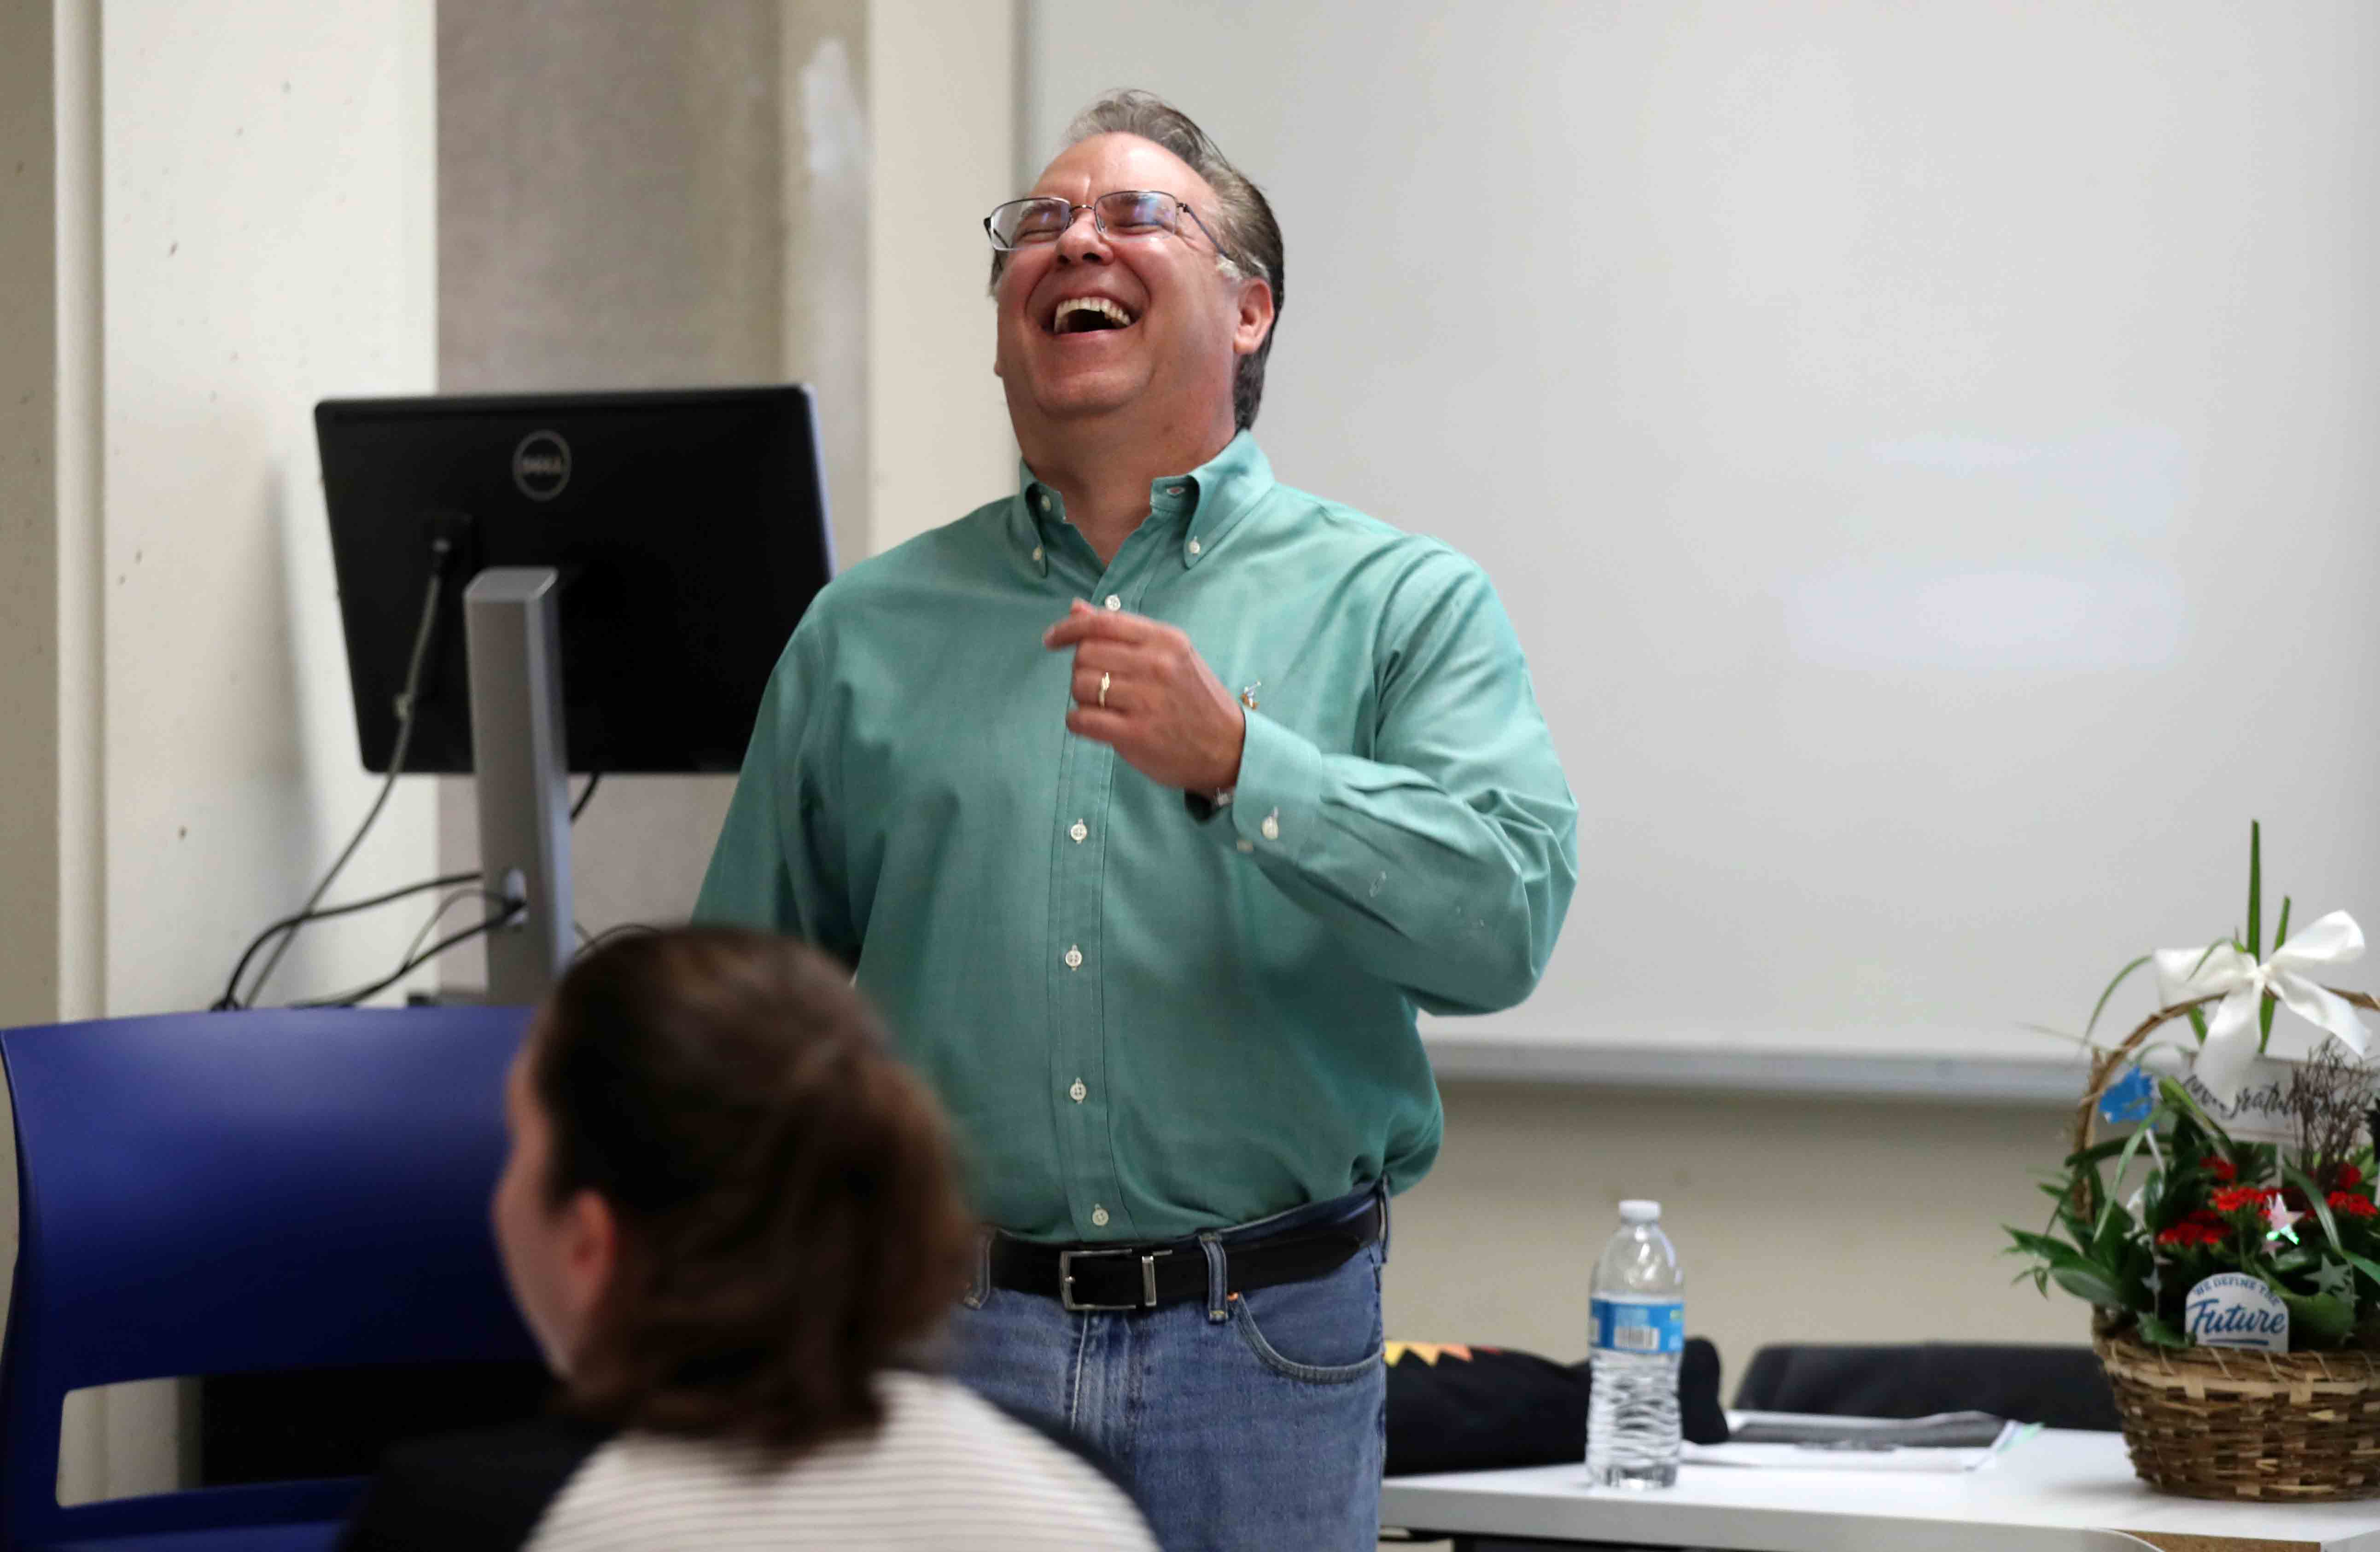 History professor surprised with the news of winning CSUSB Outstanding Service Award